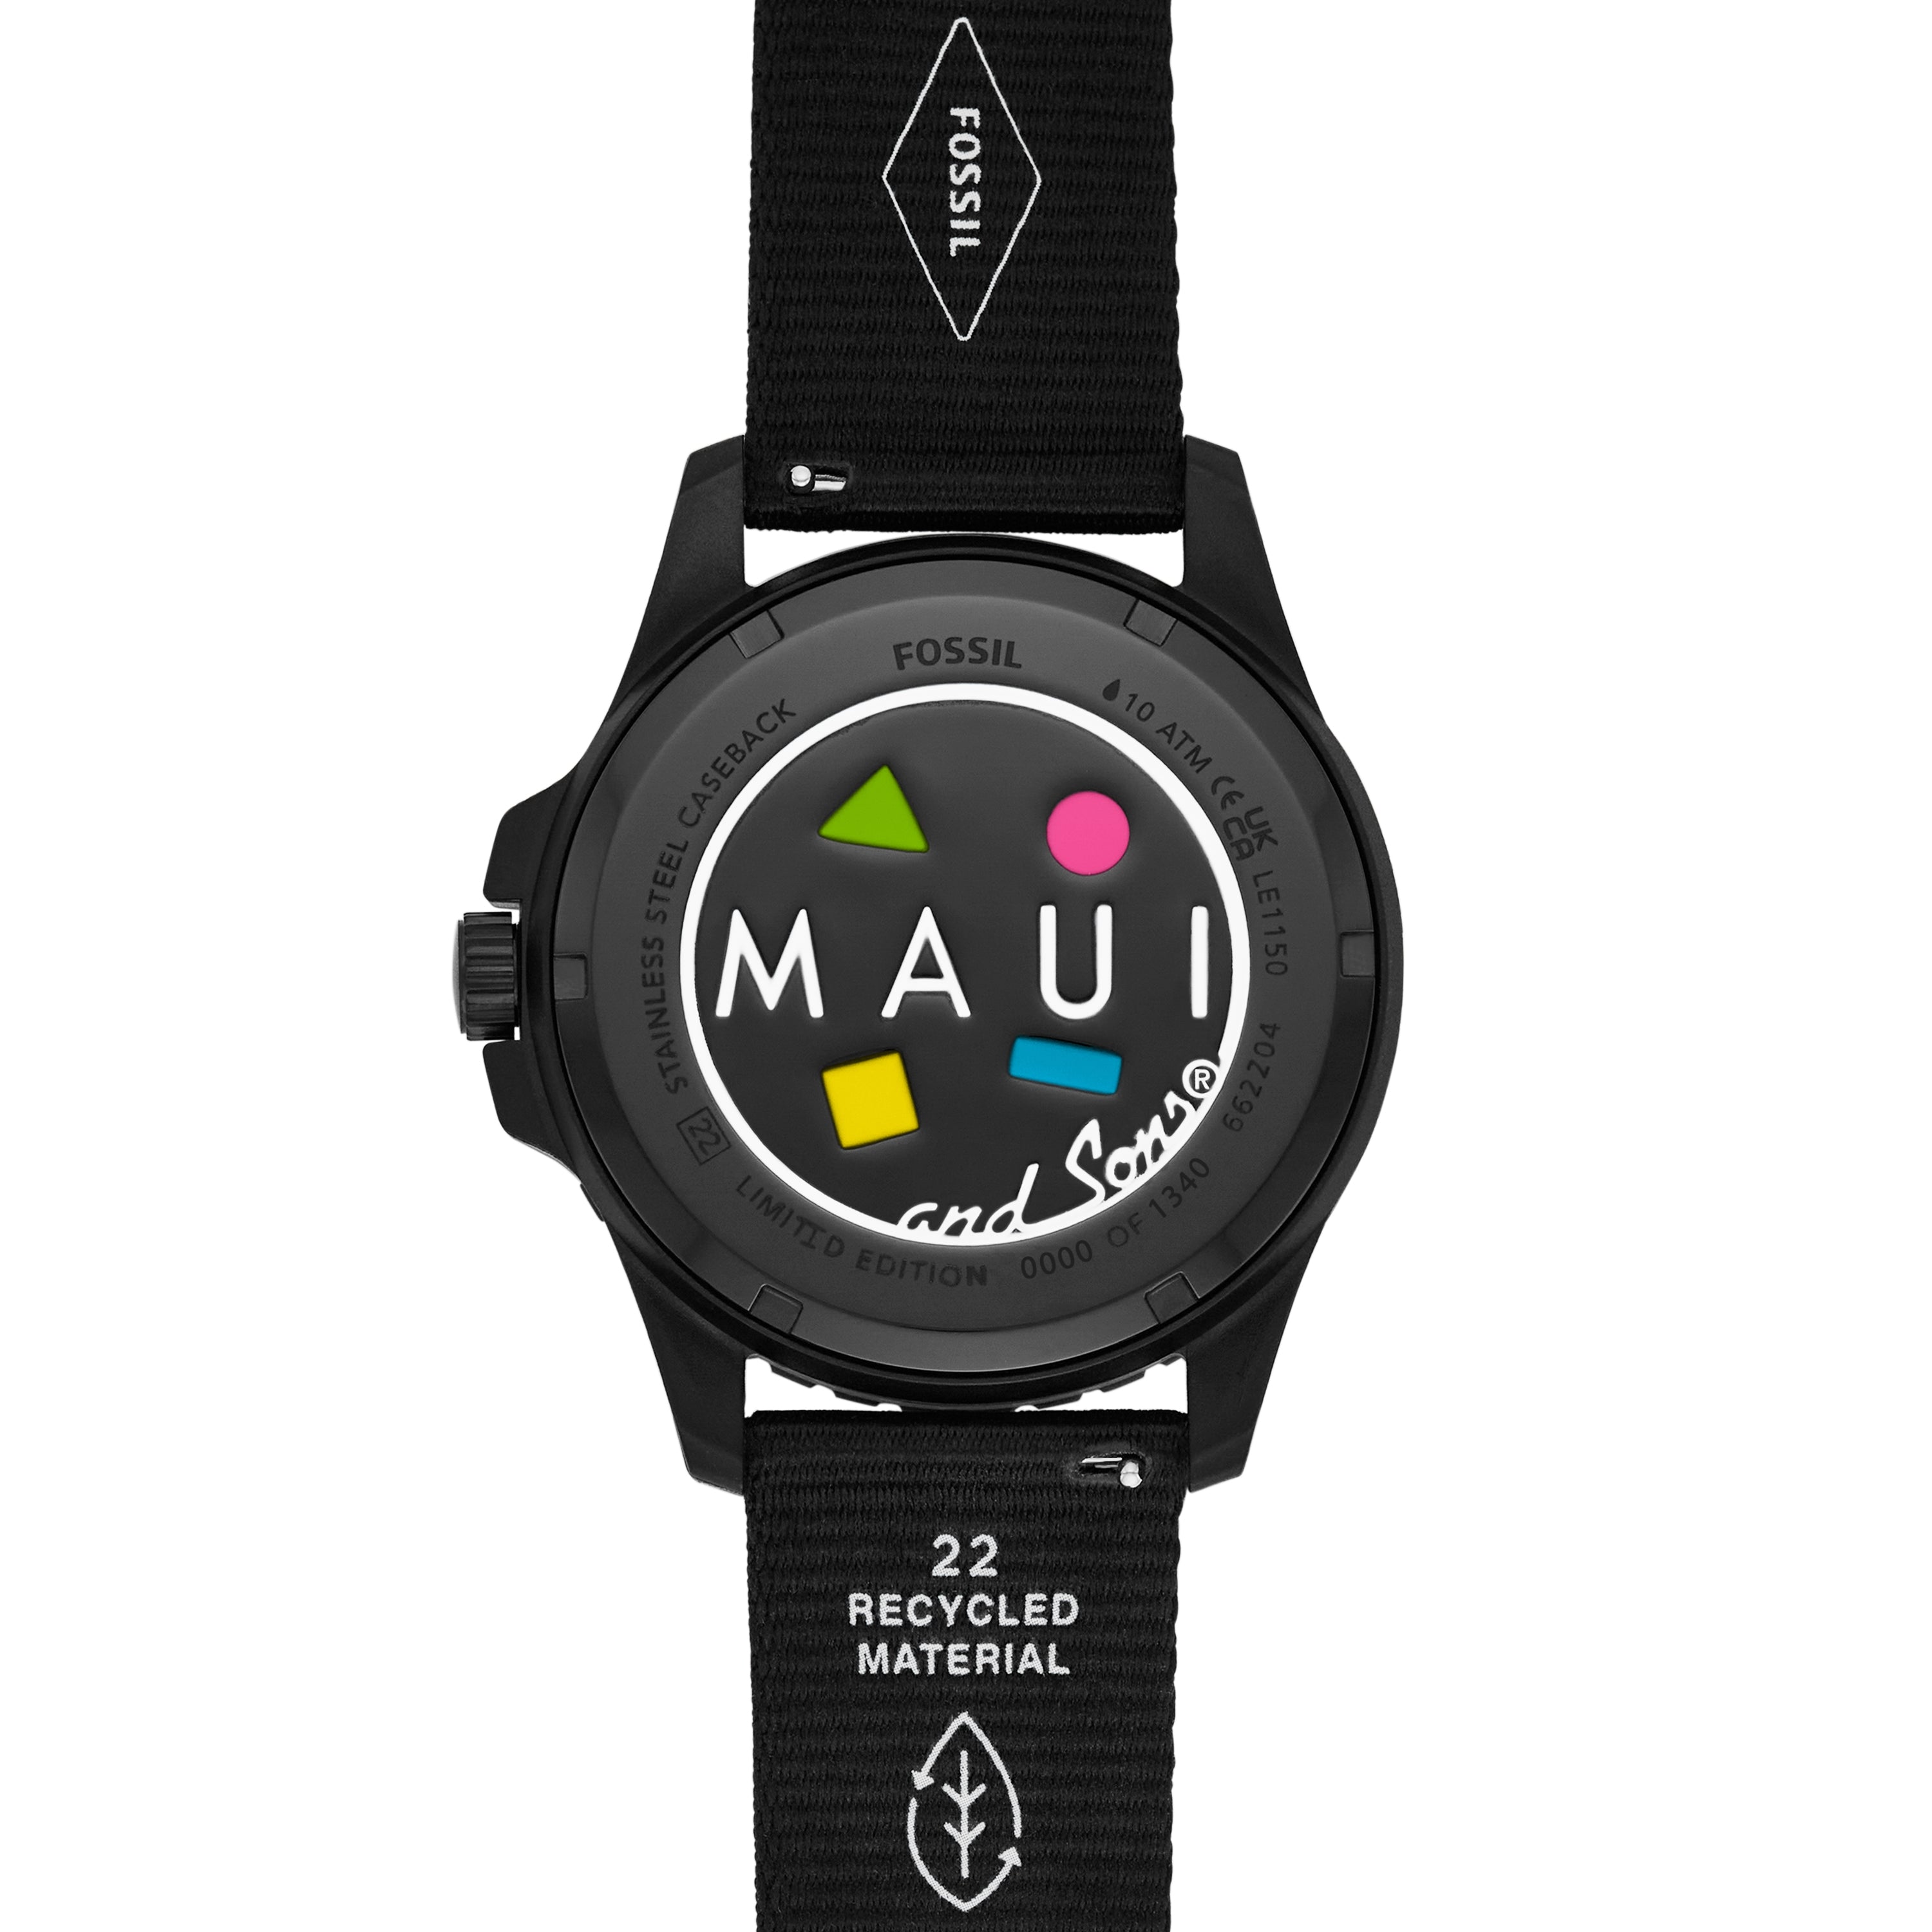 Maui and Sons x Fossil FB-01 Solar-Powered Watch